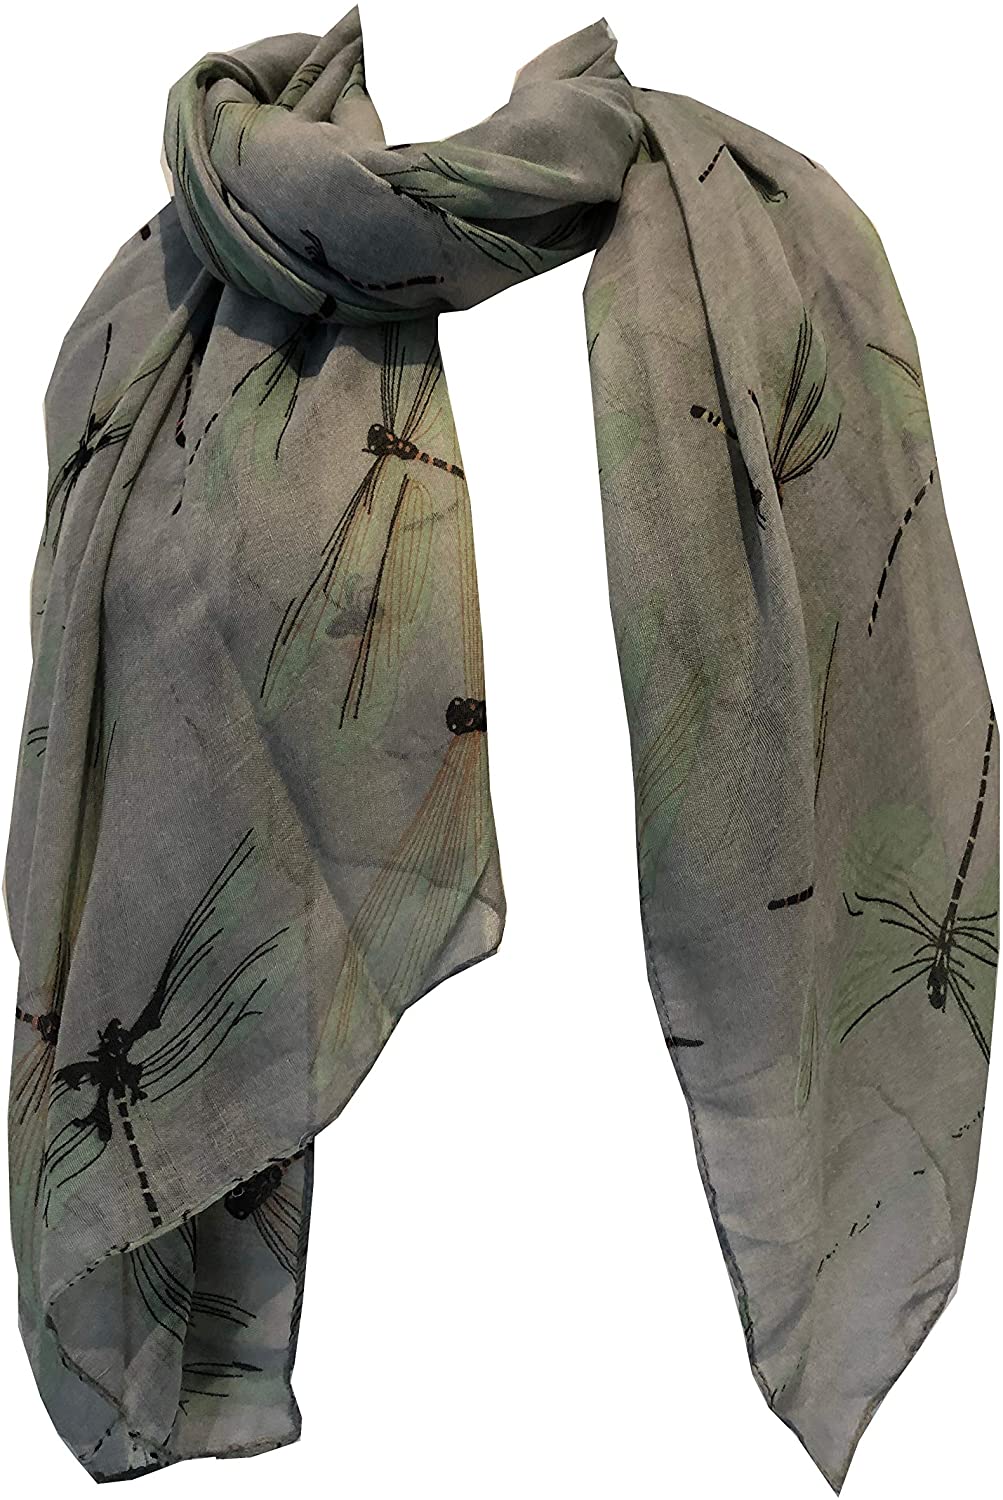 Pamper Yourself Now Grey with Coloured Big Dragonfly Design Scarf Lovely Soft Scarf Fantastic Gift